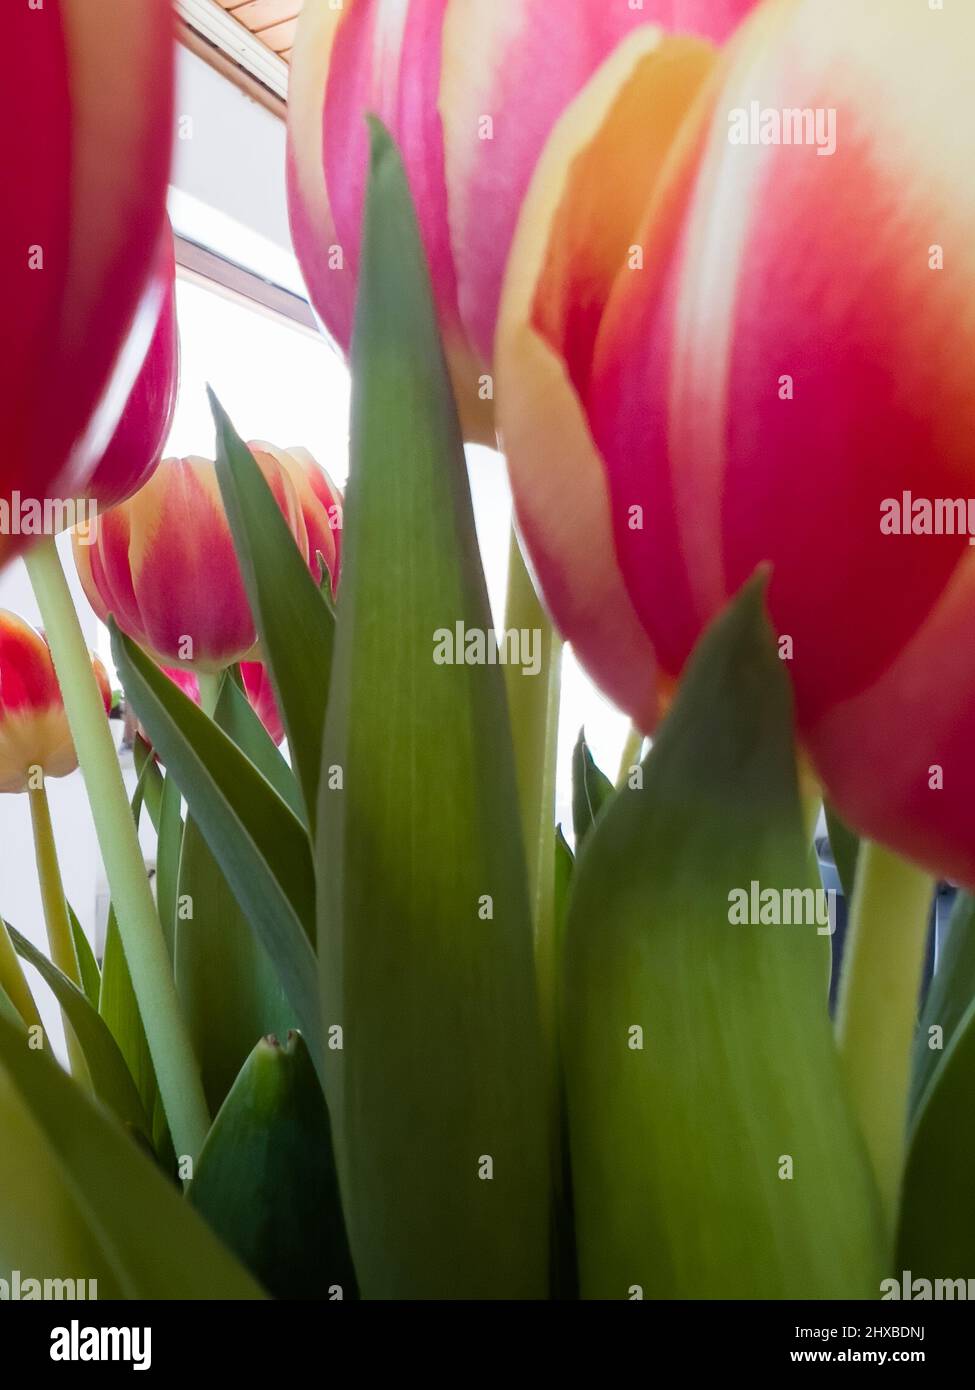 Bouquet of tulips with a window on the background Stock Photo